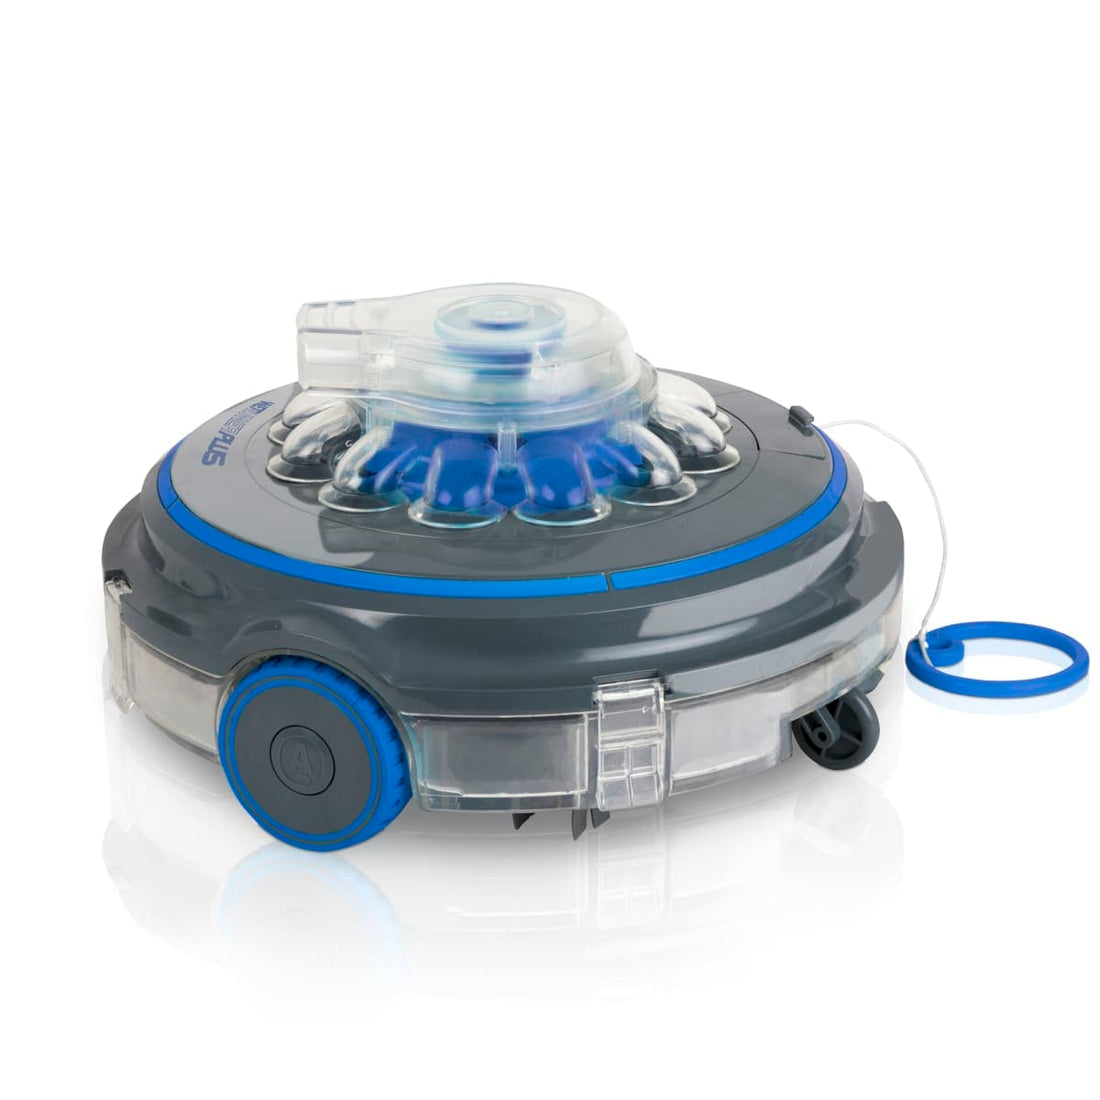 RBR75 BATTERY ROBOT FOR POOLS UP TO 10x5 m - best price from Maltashopper.com BR500015759